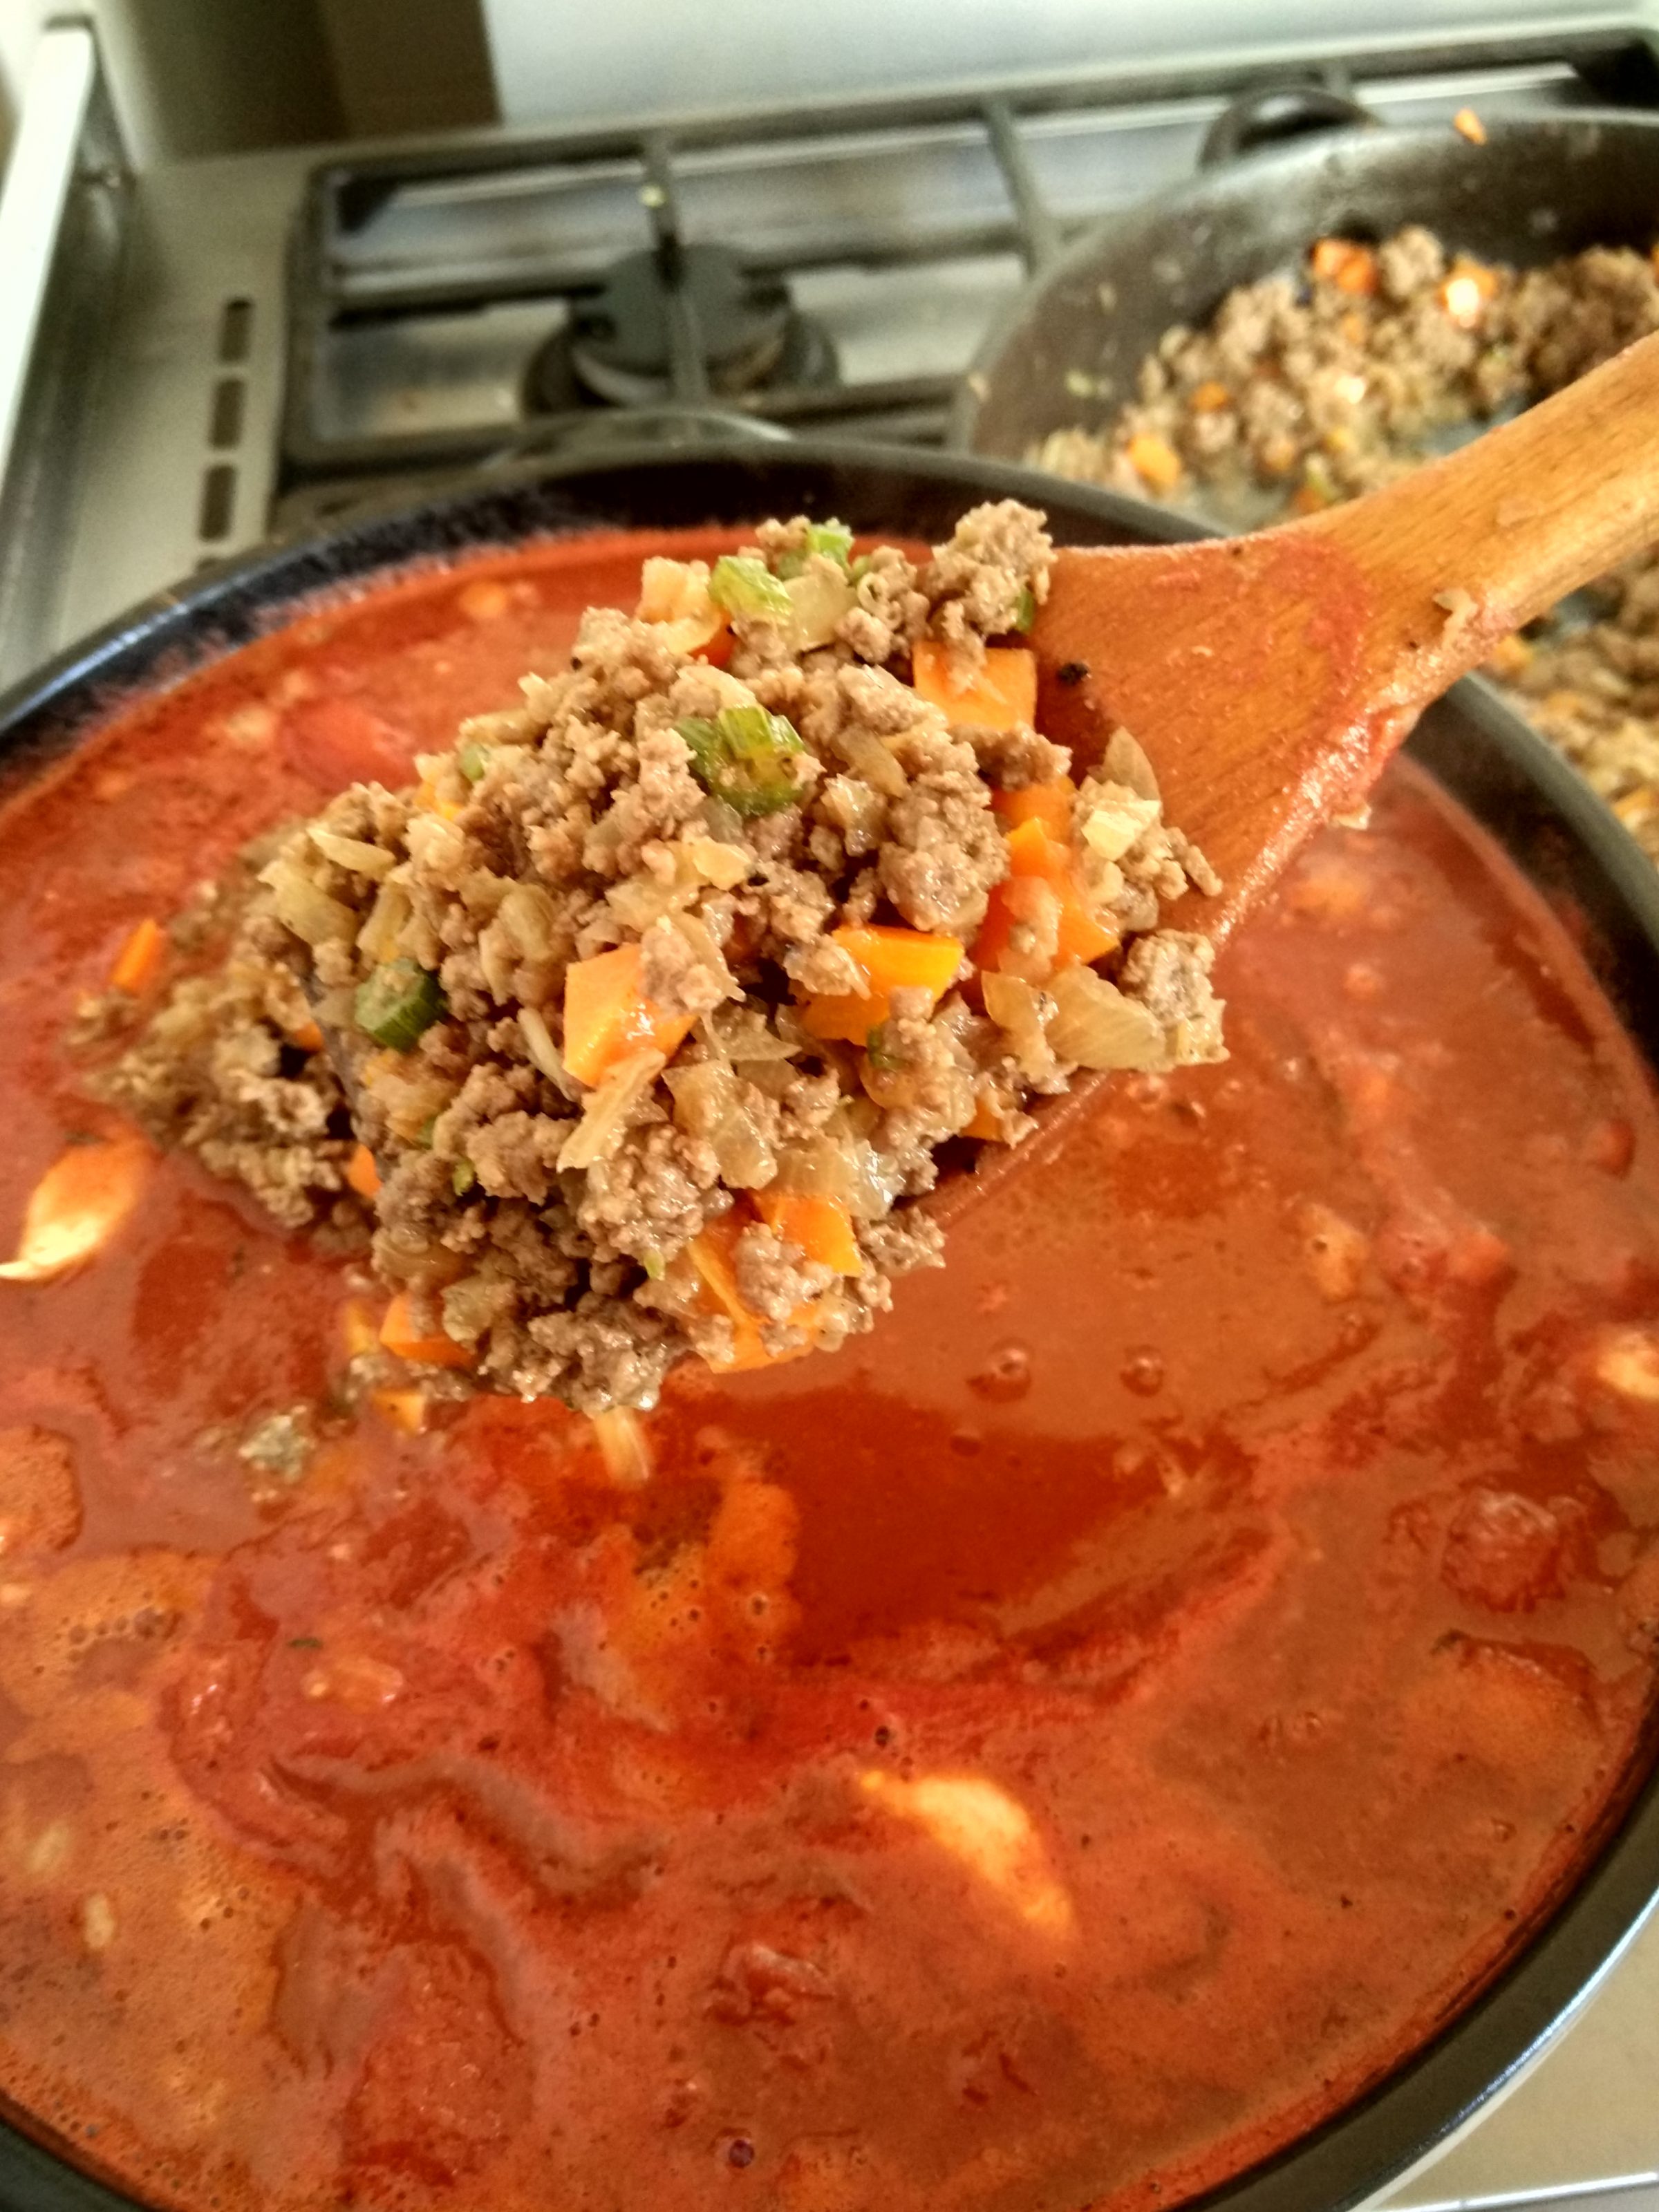 Ragu Bolognese Sauce - Cook in city - Enjoy the cooking action!